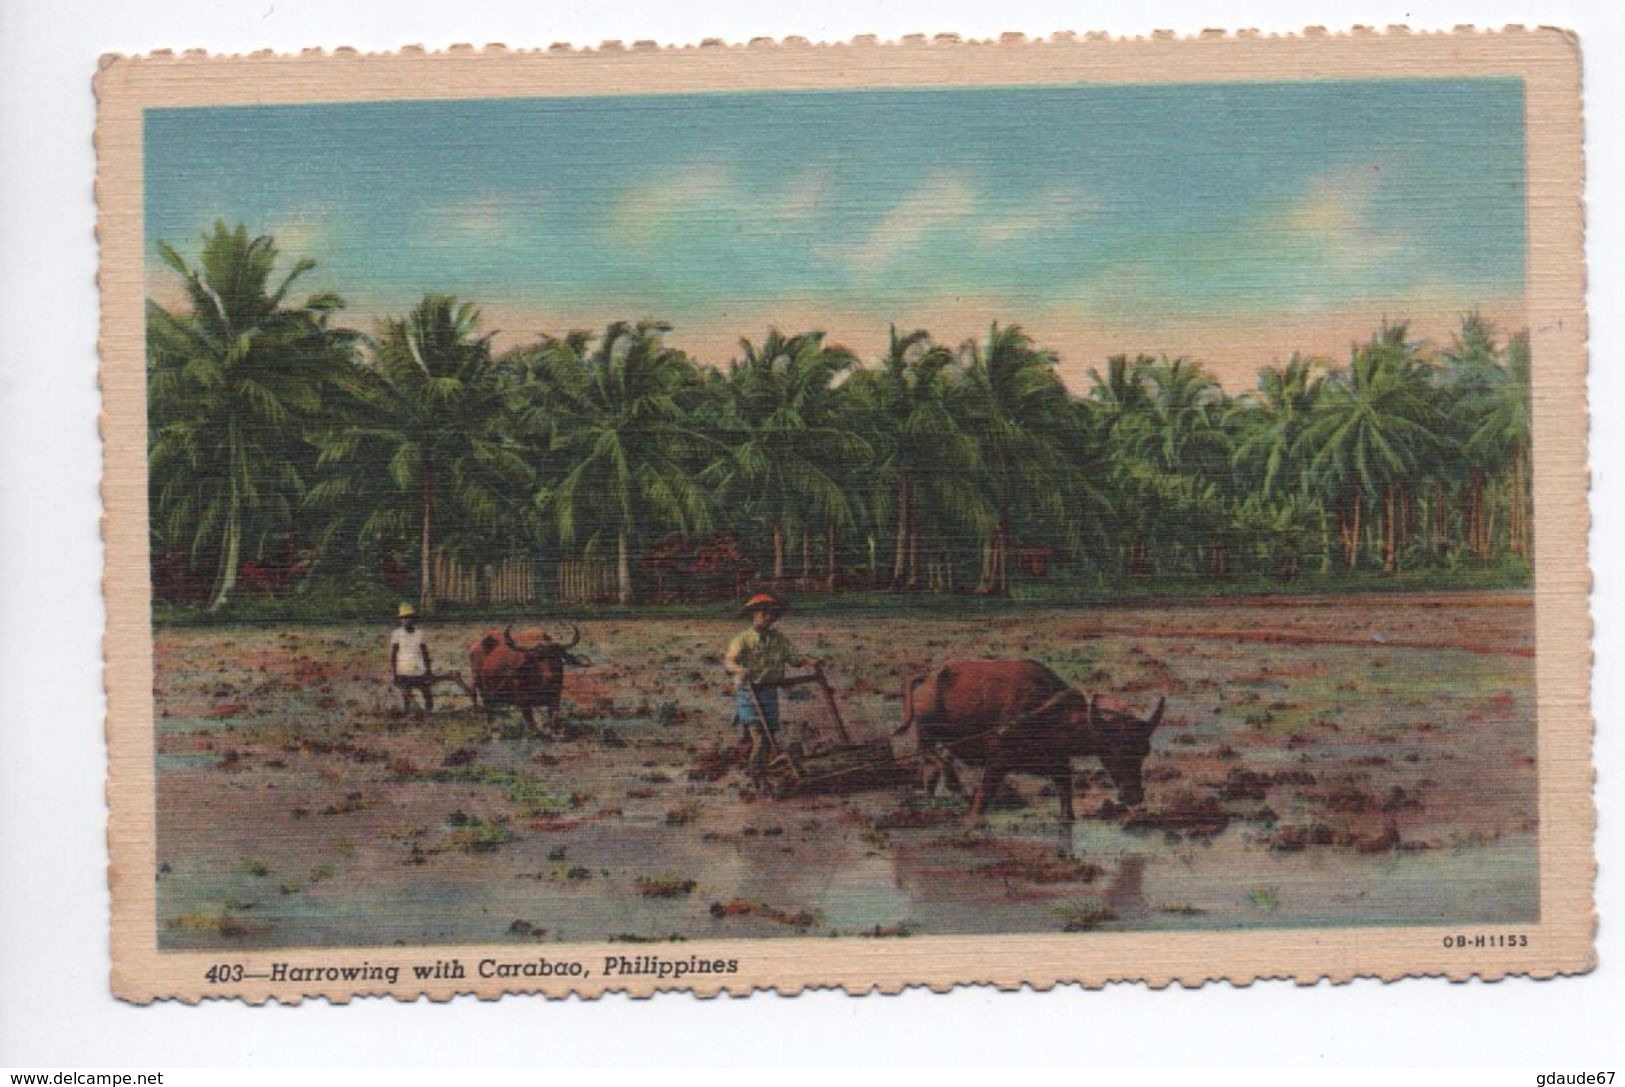 PHILIPPINES - HARROWING WITH CARABAO - AGRICULTURE - Philippines